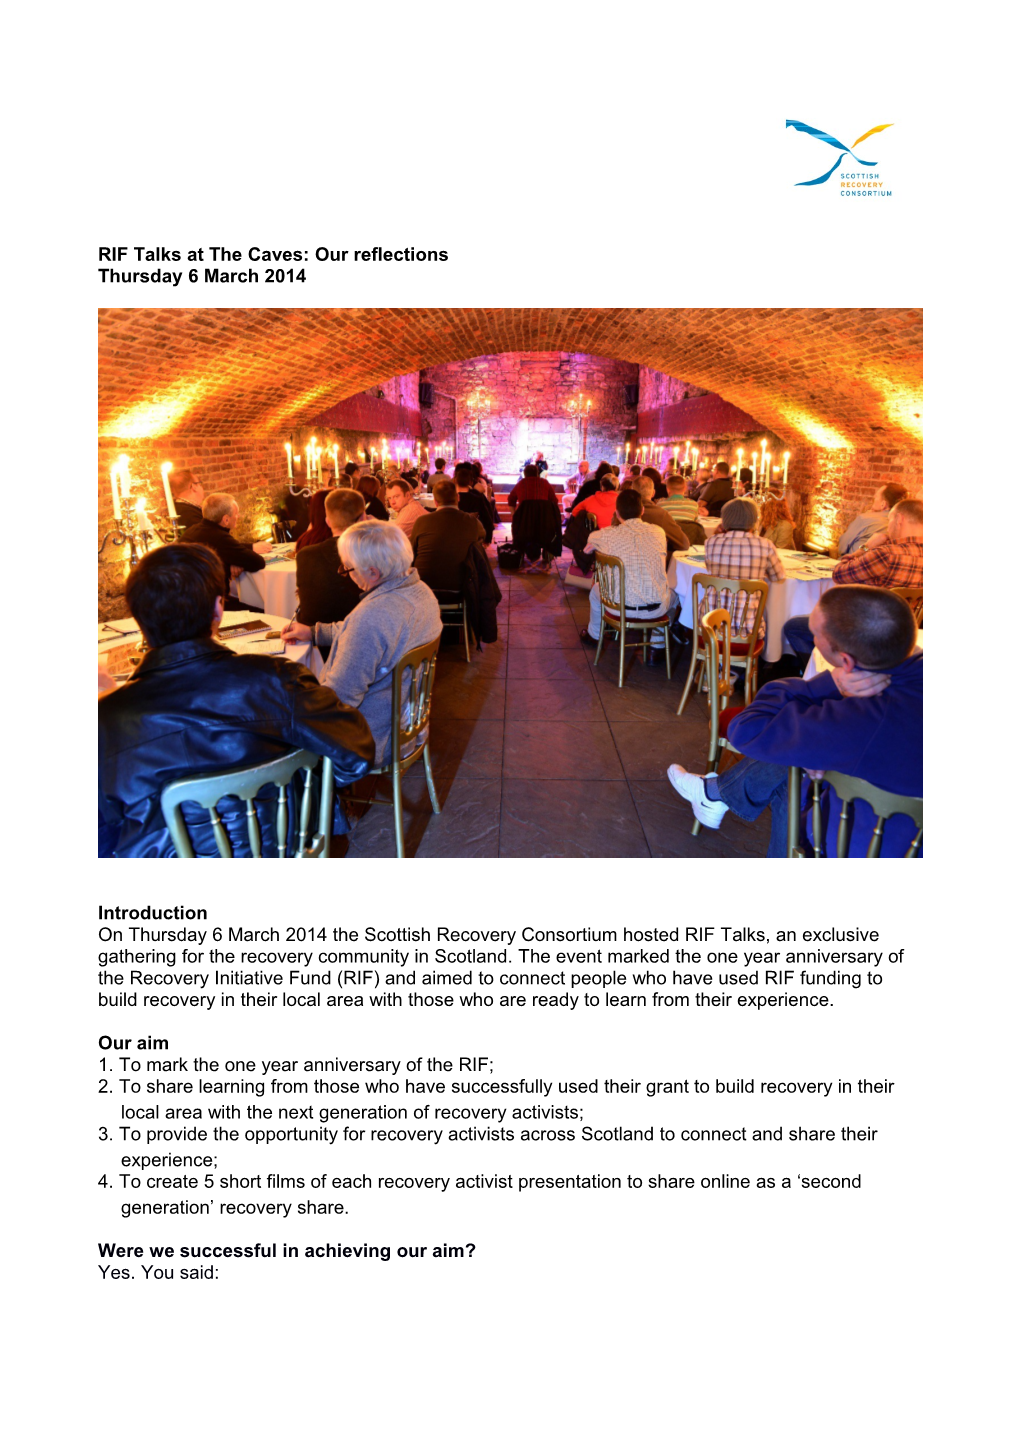 RIF Talks at the Caves: Our Reflections Thursday 6 March 2014